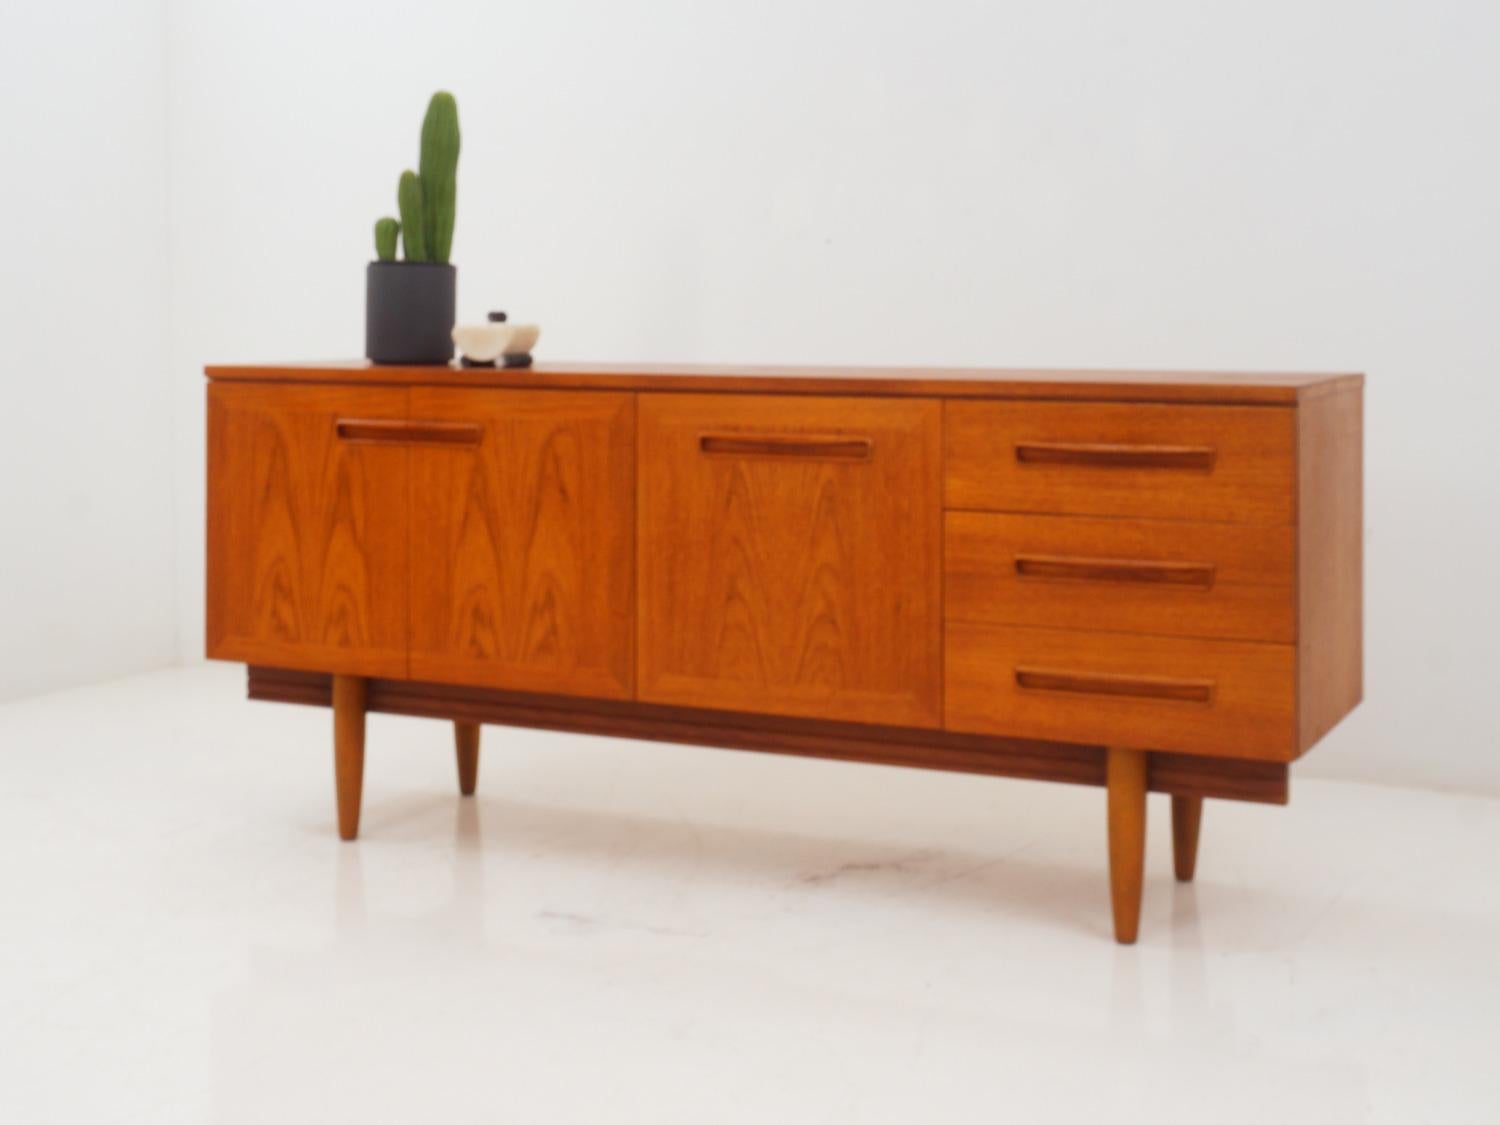 Discover the epitome of midcentury charm with a meticulously crafted teakwood credenza. It combines timeless beauty of clean lines, warm teak hues, and sleek design, while offering ample storage space. 

- 67